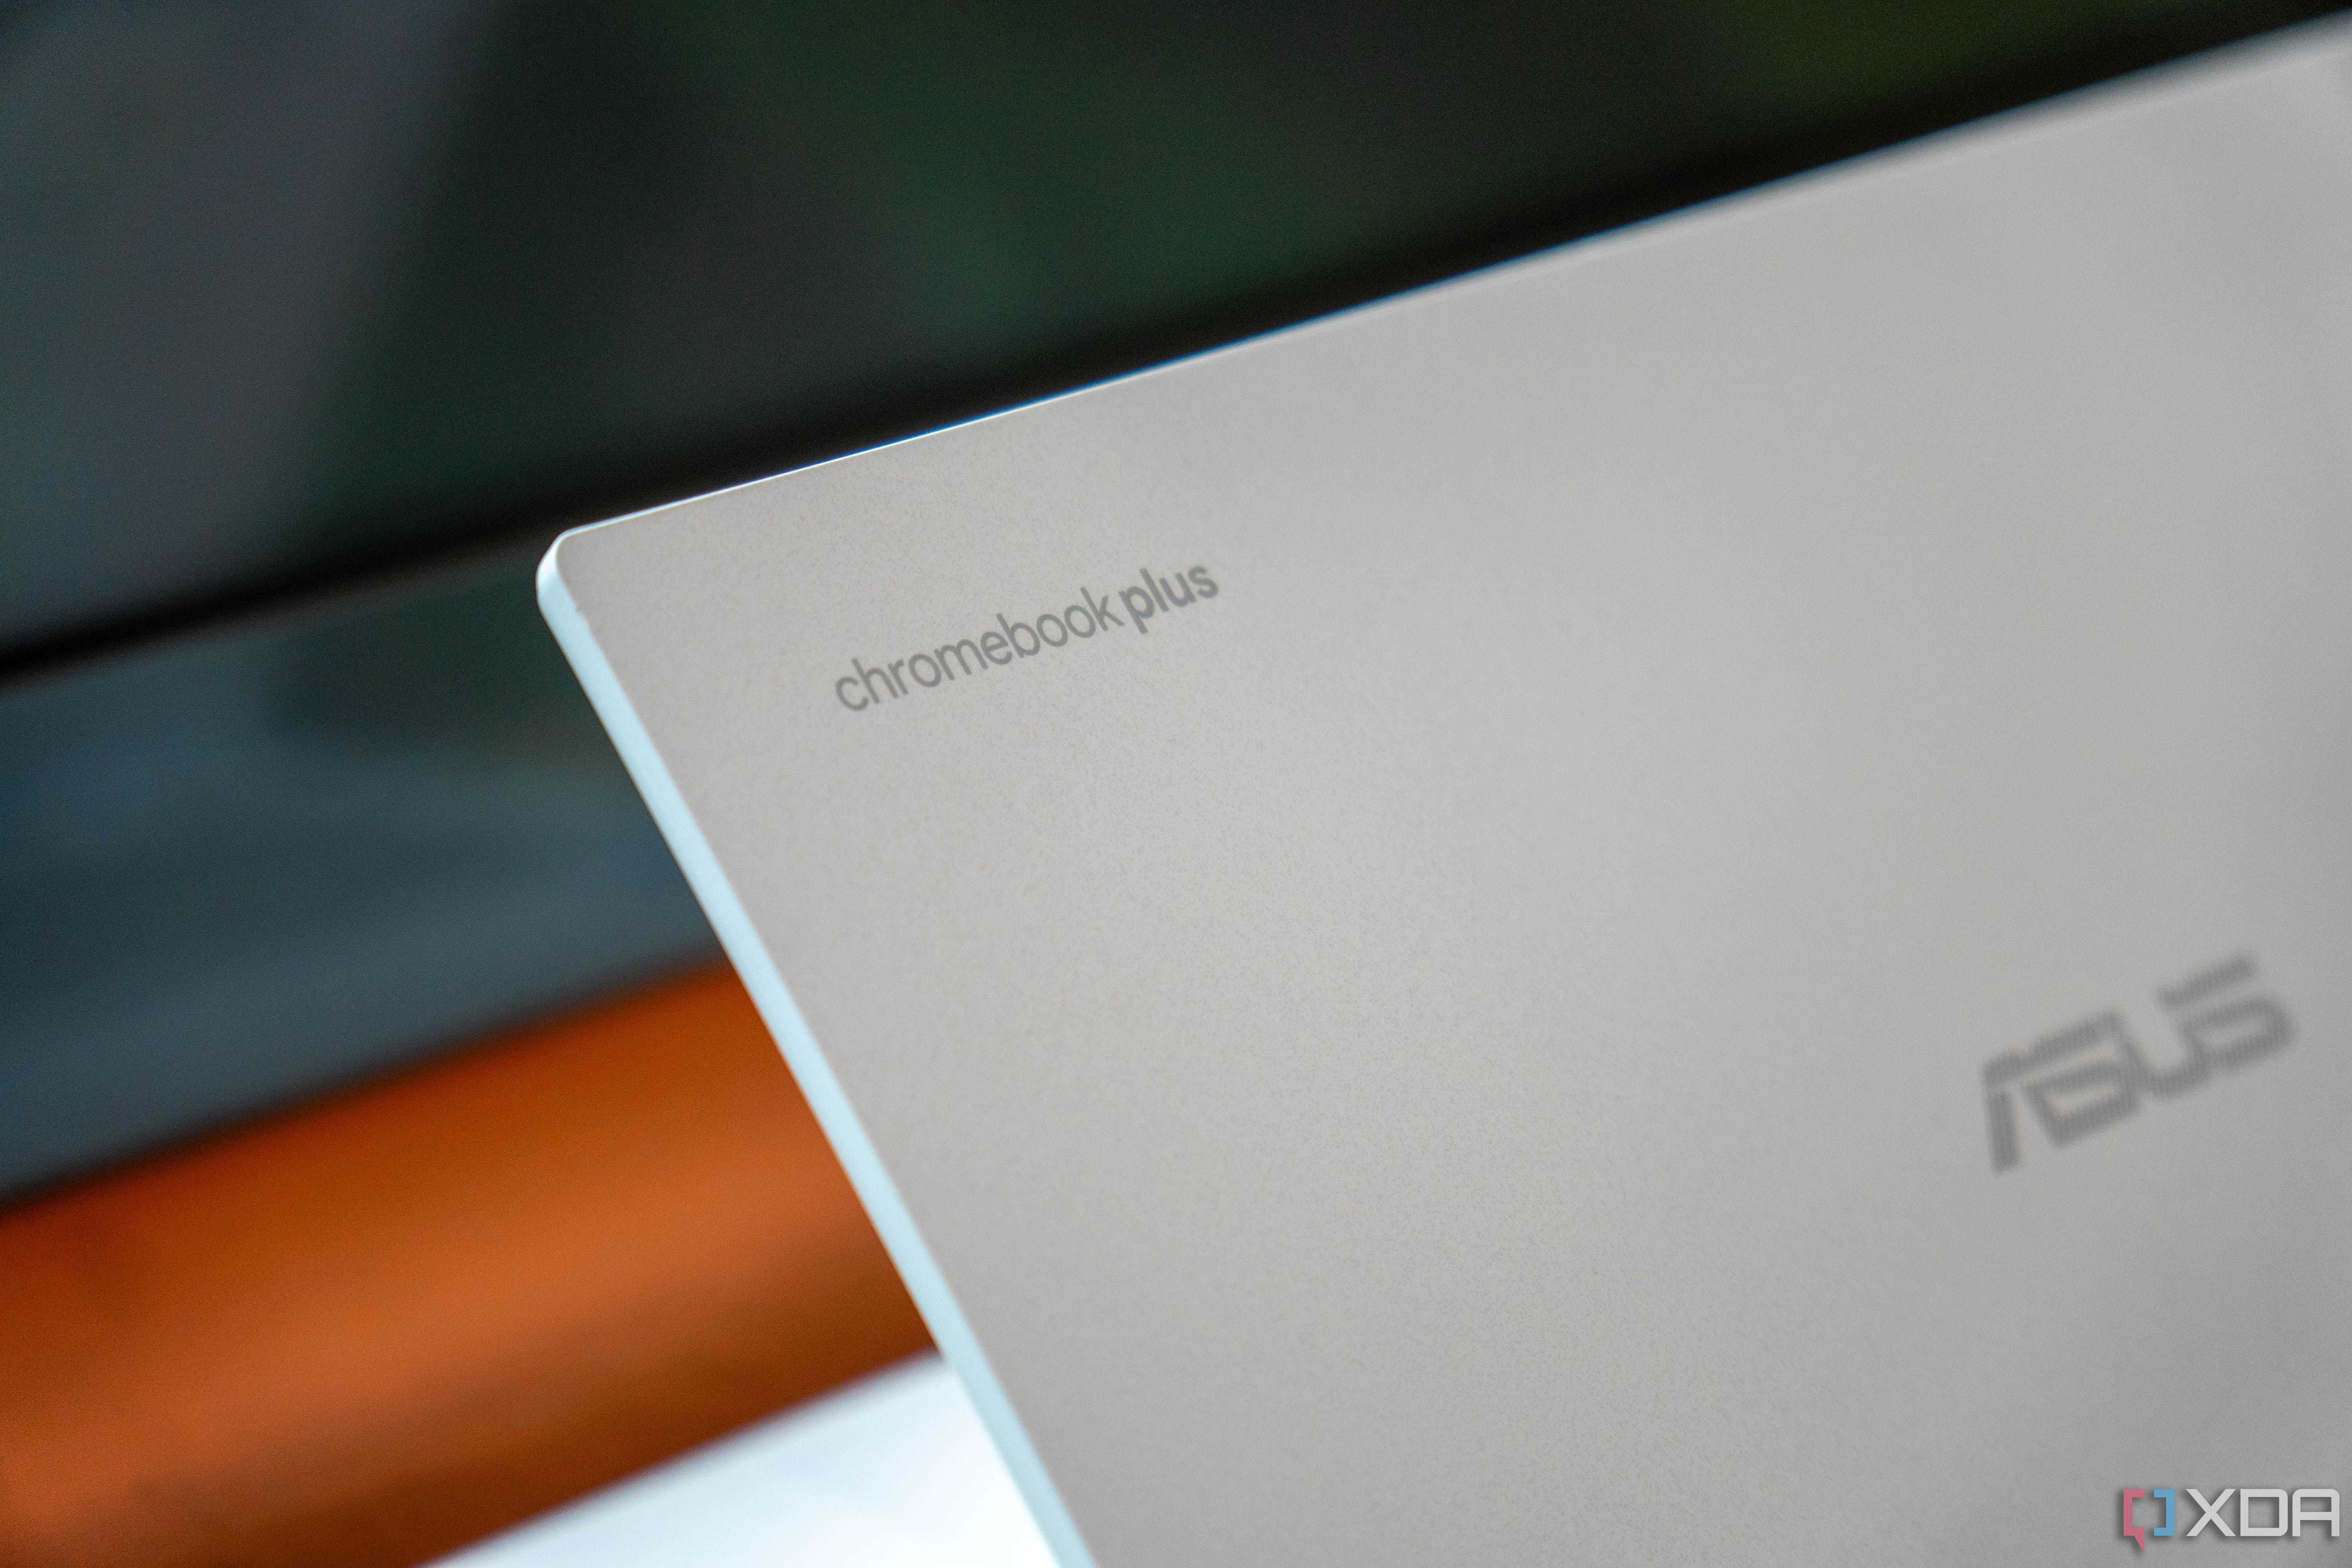 Miss Pixelbook? Google is partnering with OEMs to make premium Chromebook Plus devices